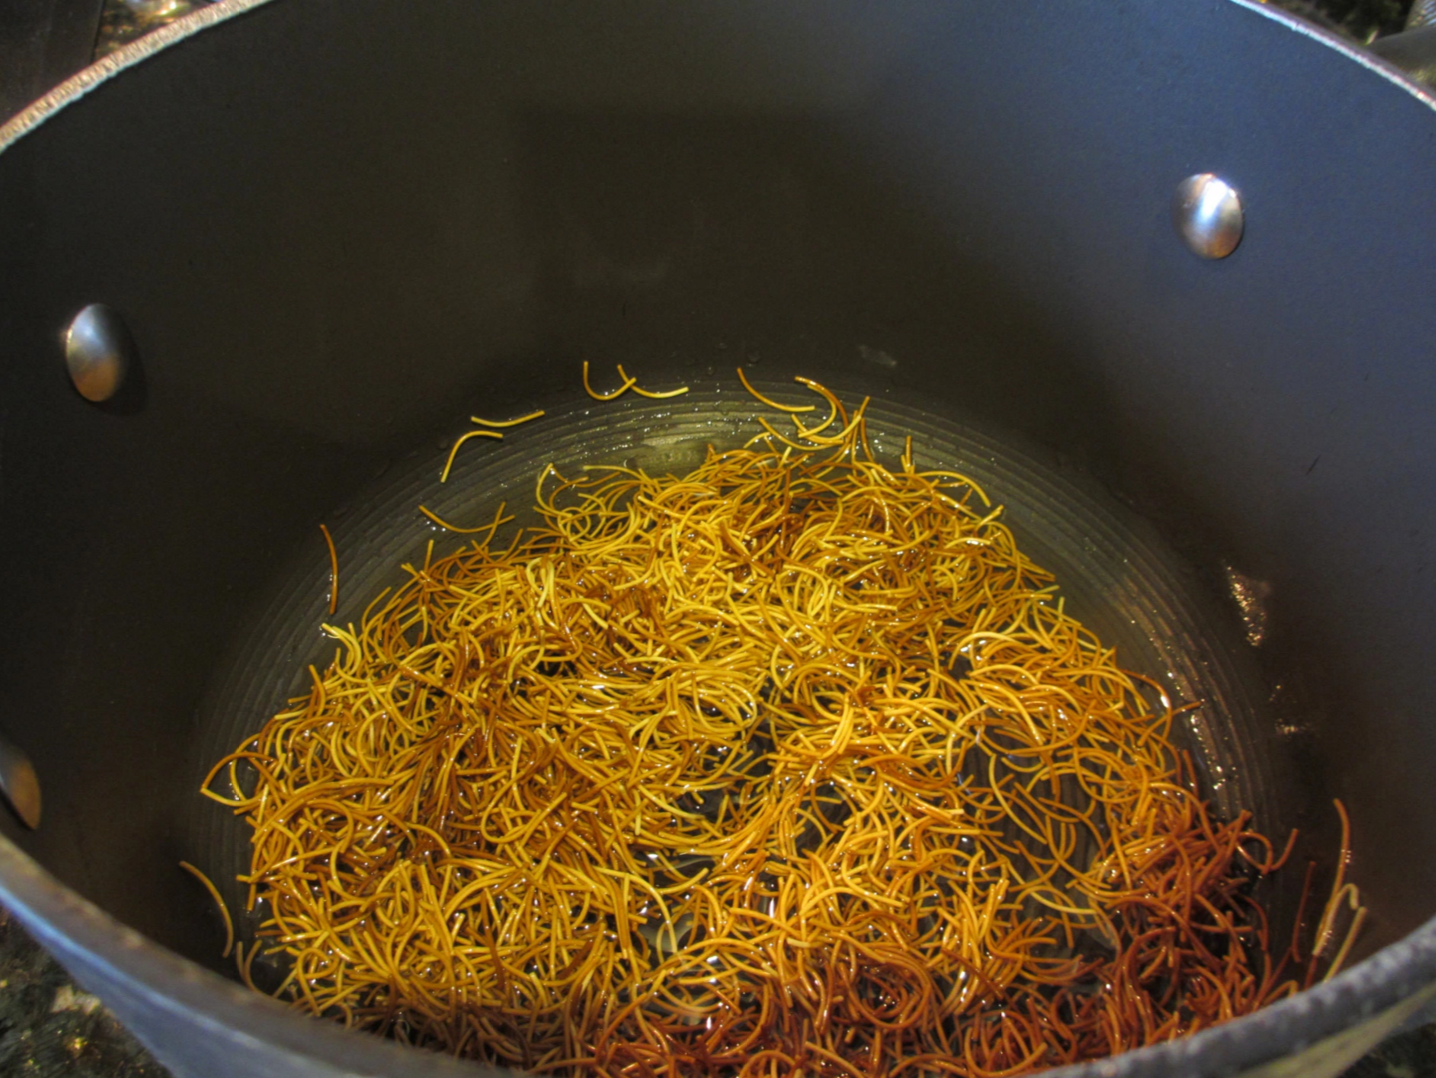 Vermicelli noodles being cooked